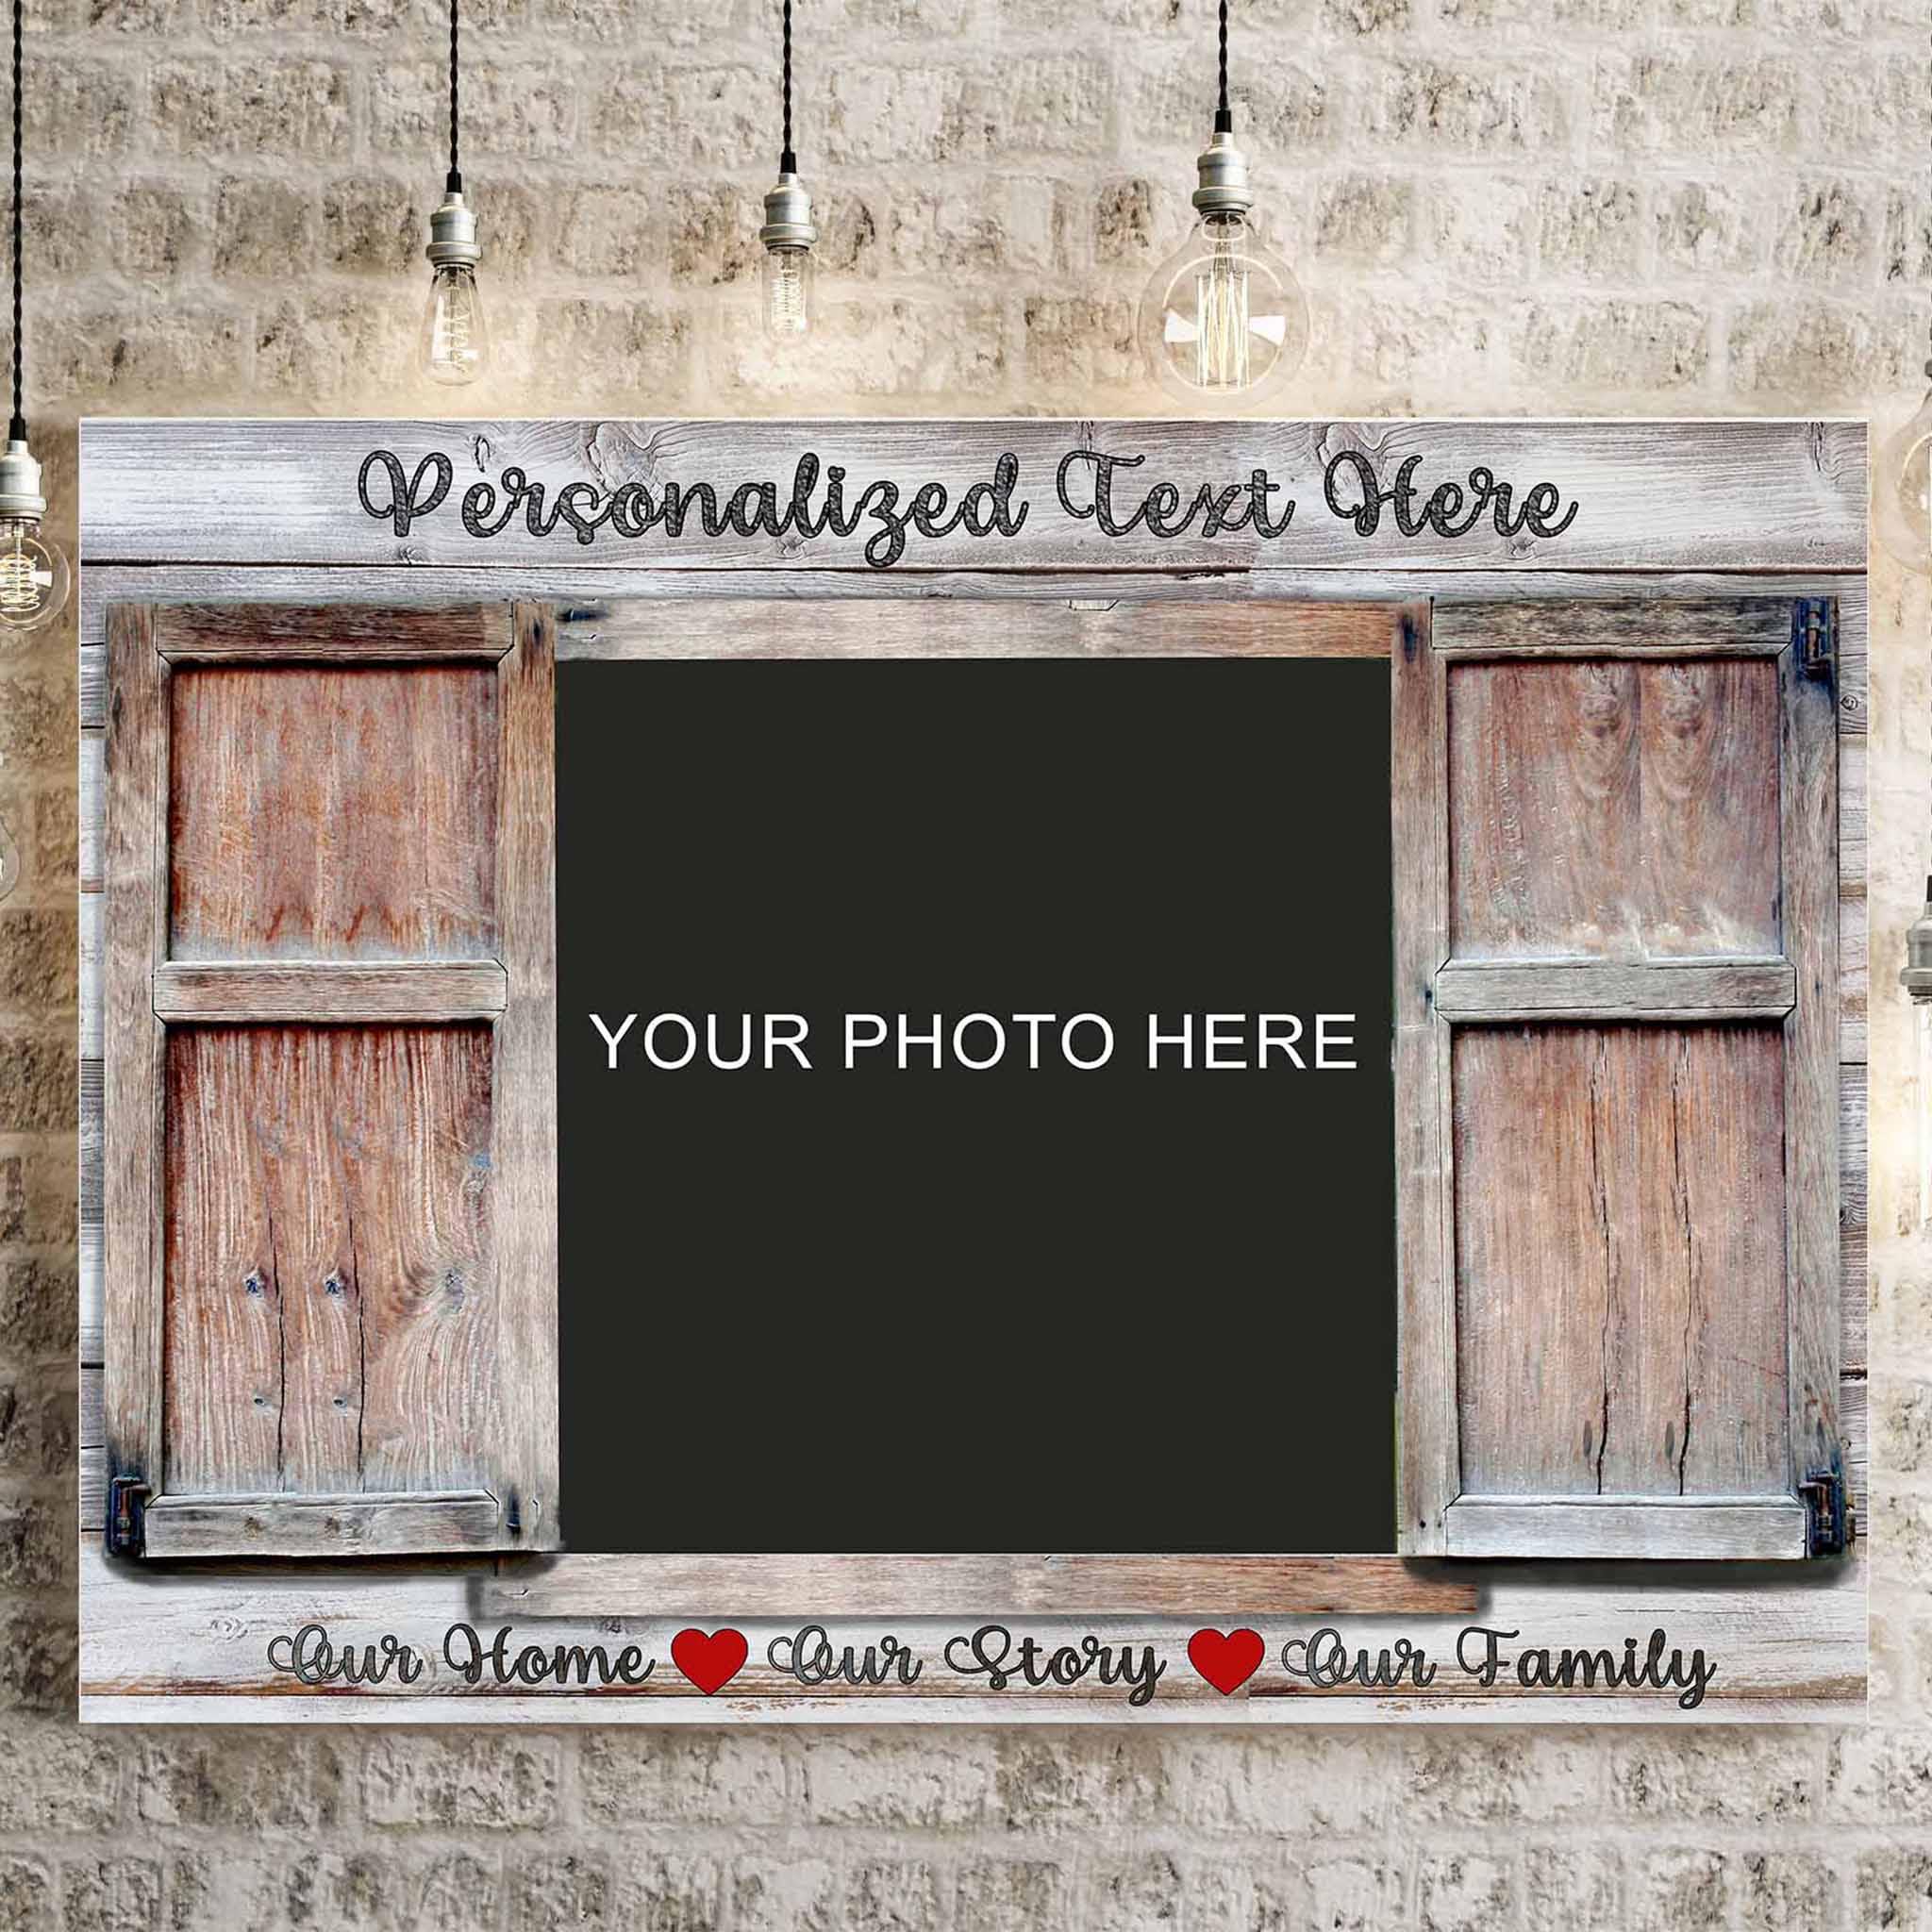 Rustic Shutters Window Photo v1 Personalized CanvasCustomly Gifts